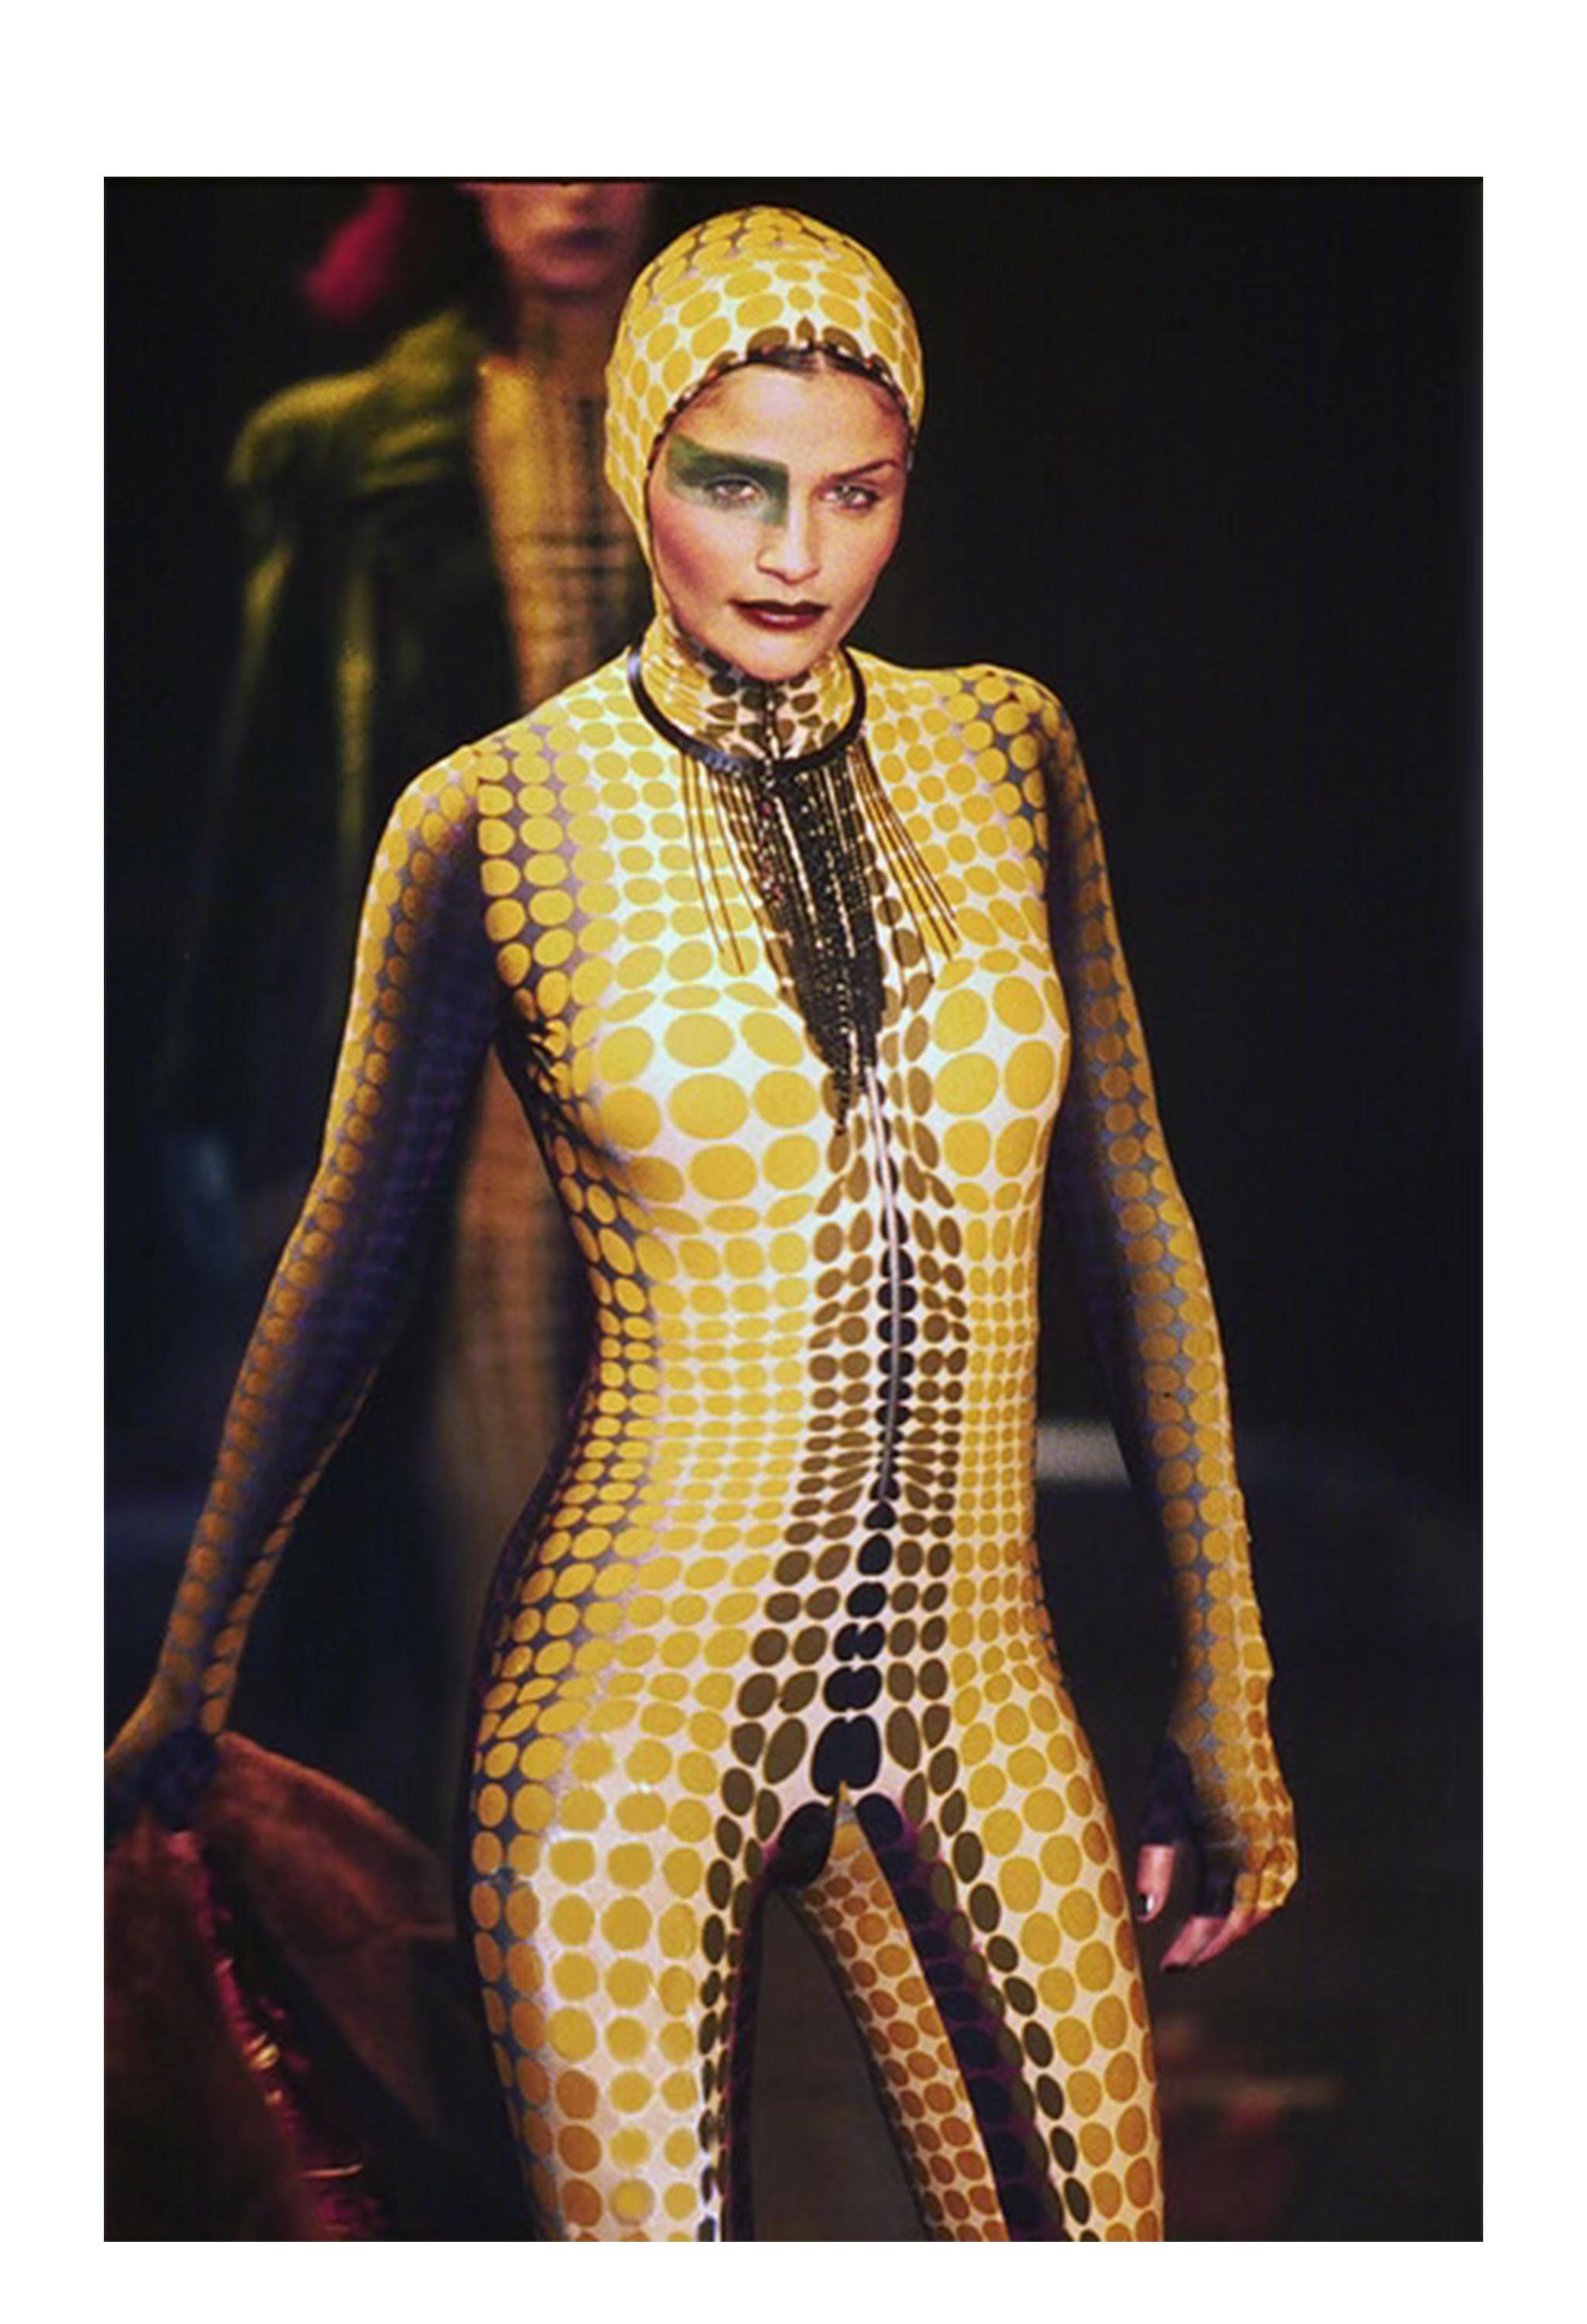 Resurrection is excited to offer an iconic vintage Jean Paul Gaultier yellow 